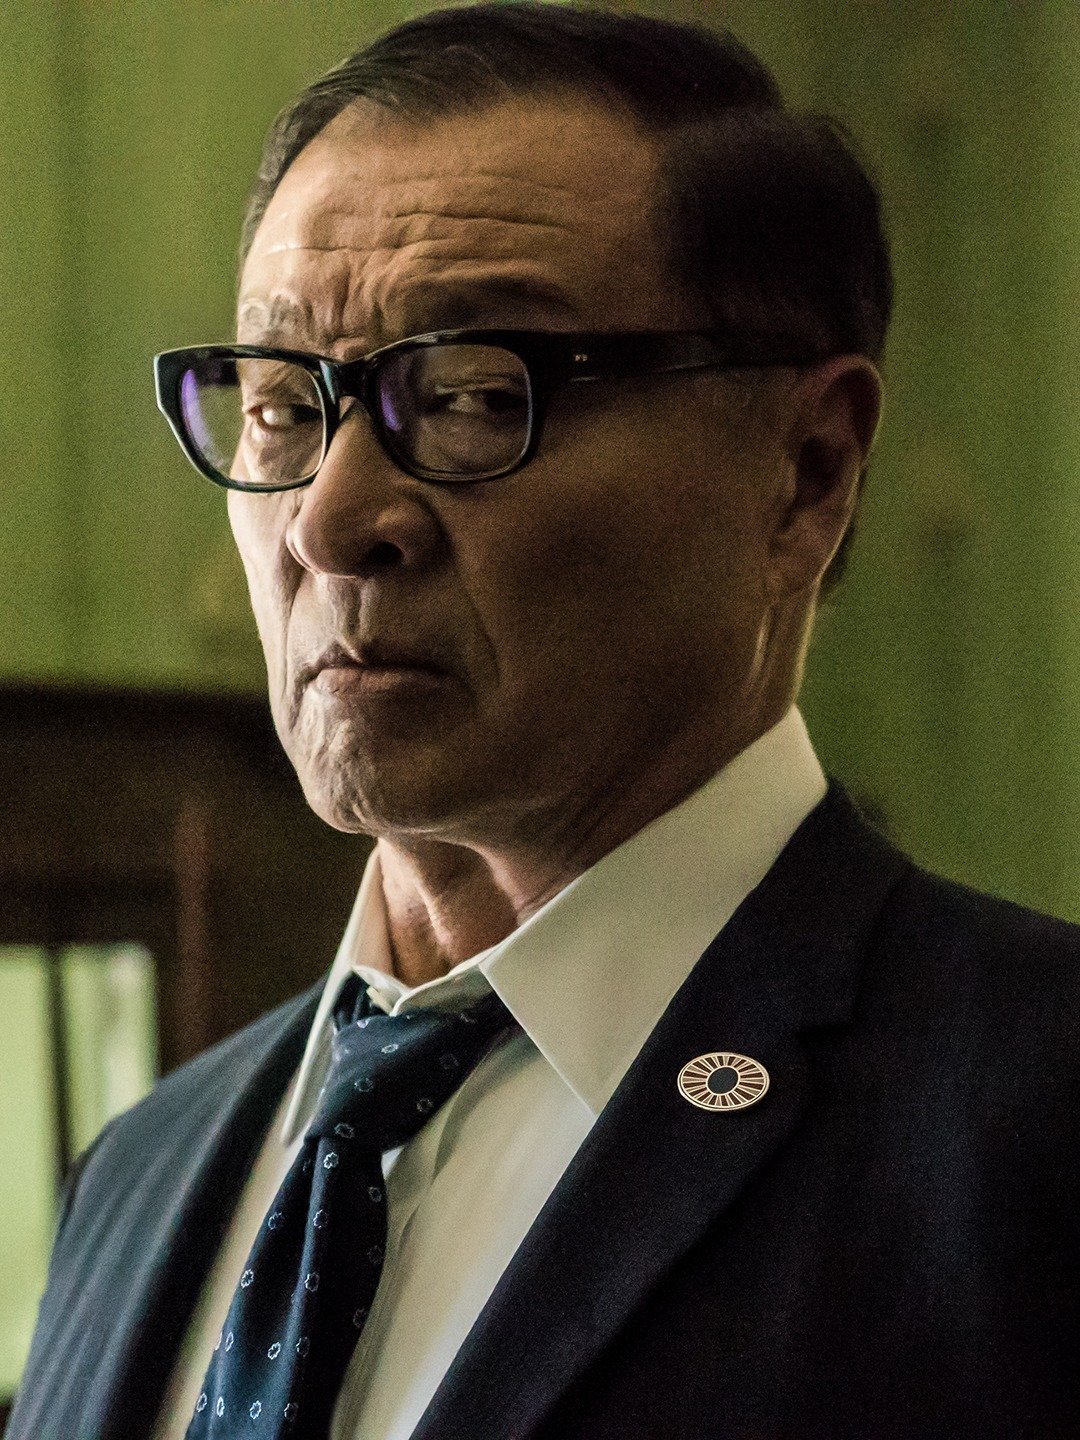 the man in the high castle season 1 rotten tomatoes